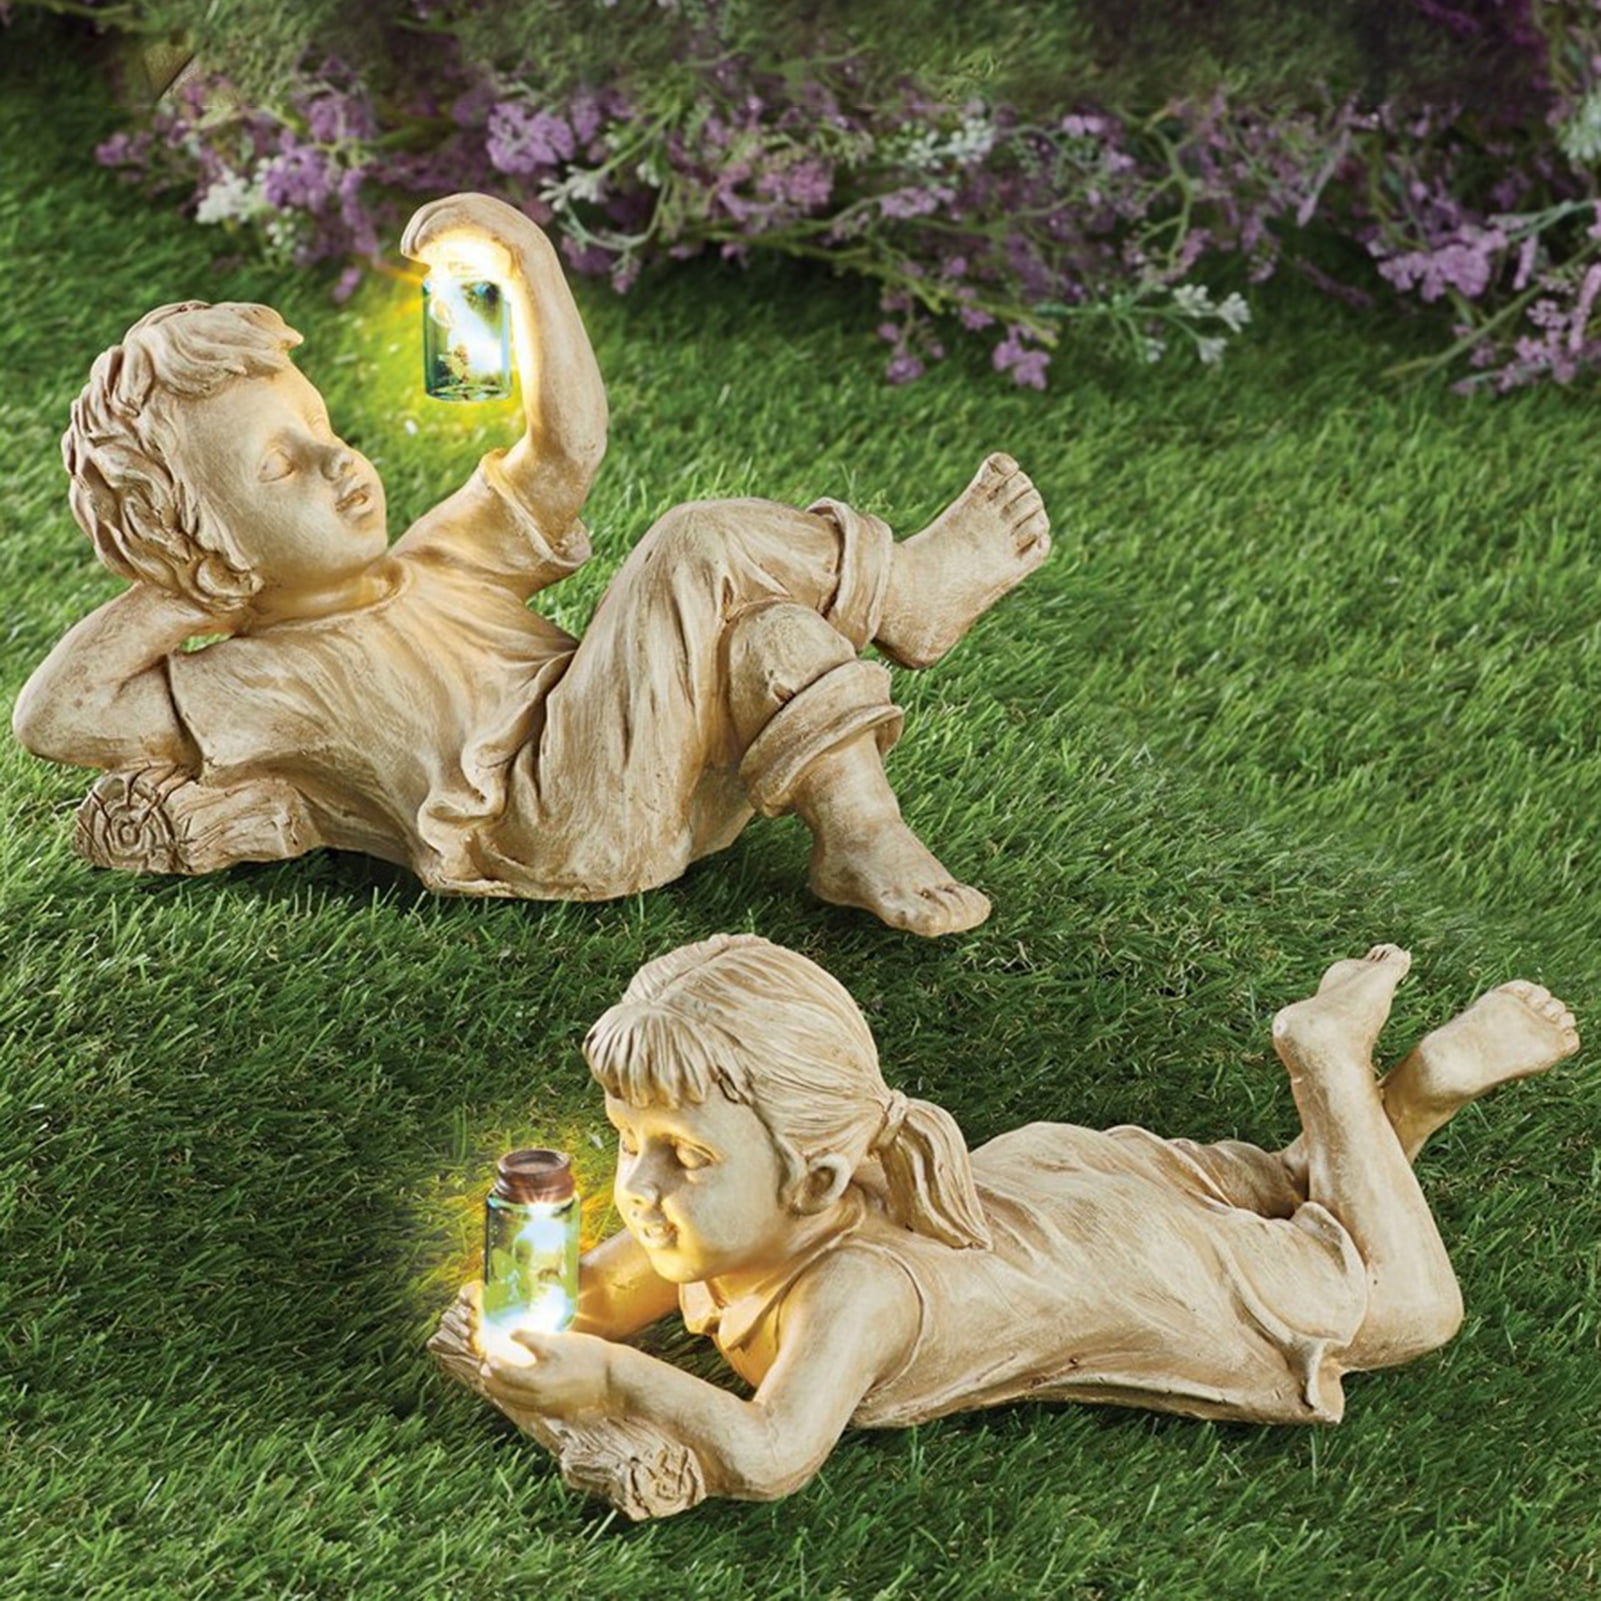 3D Resin Garden Statue of a Fisherman Boy, for Home, Outdoor, Lawn